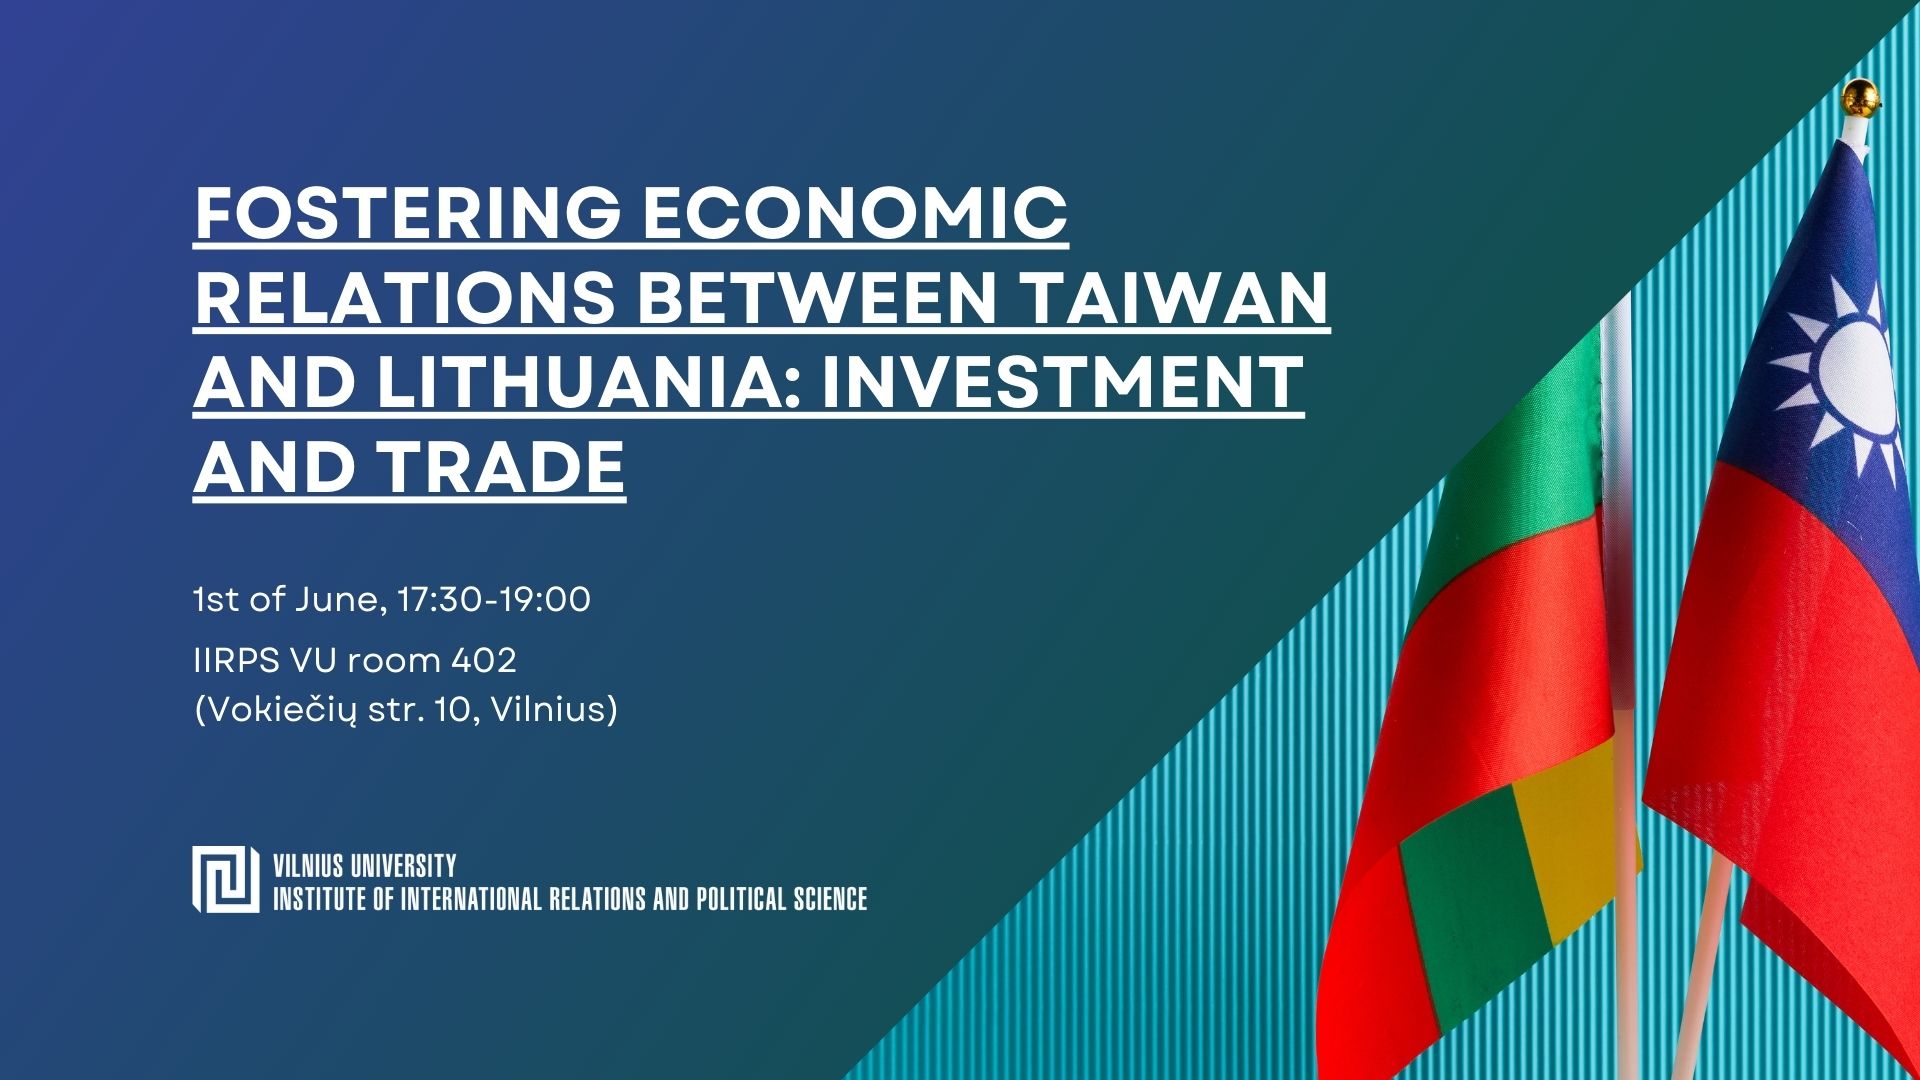 Fostering economic relations between Taiwan and Lithuania: Investment and trade